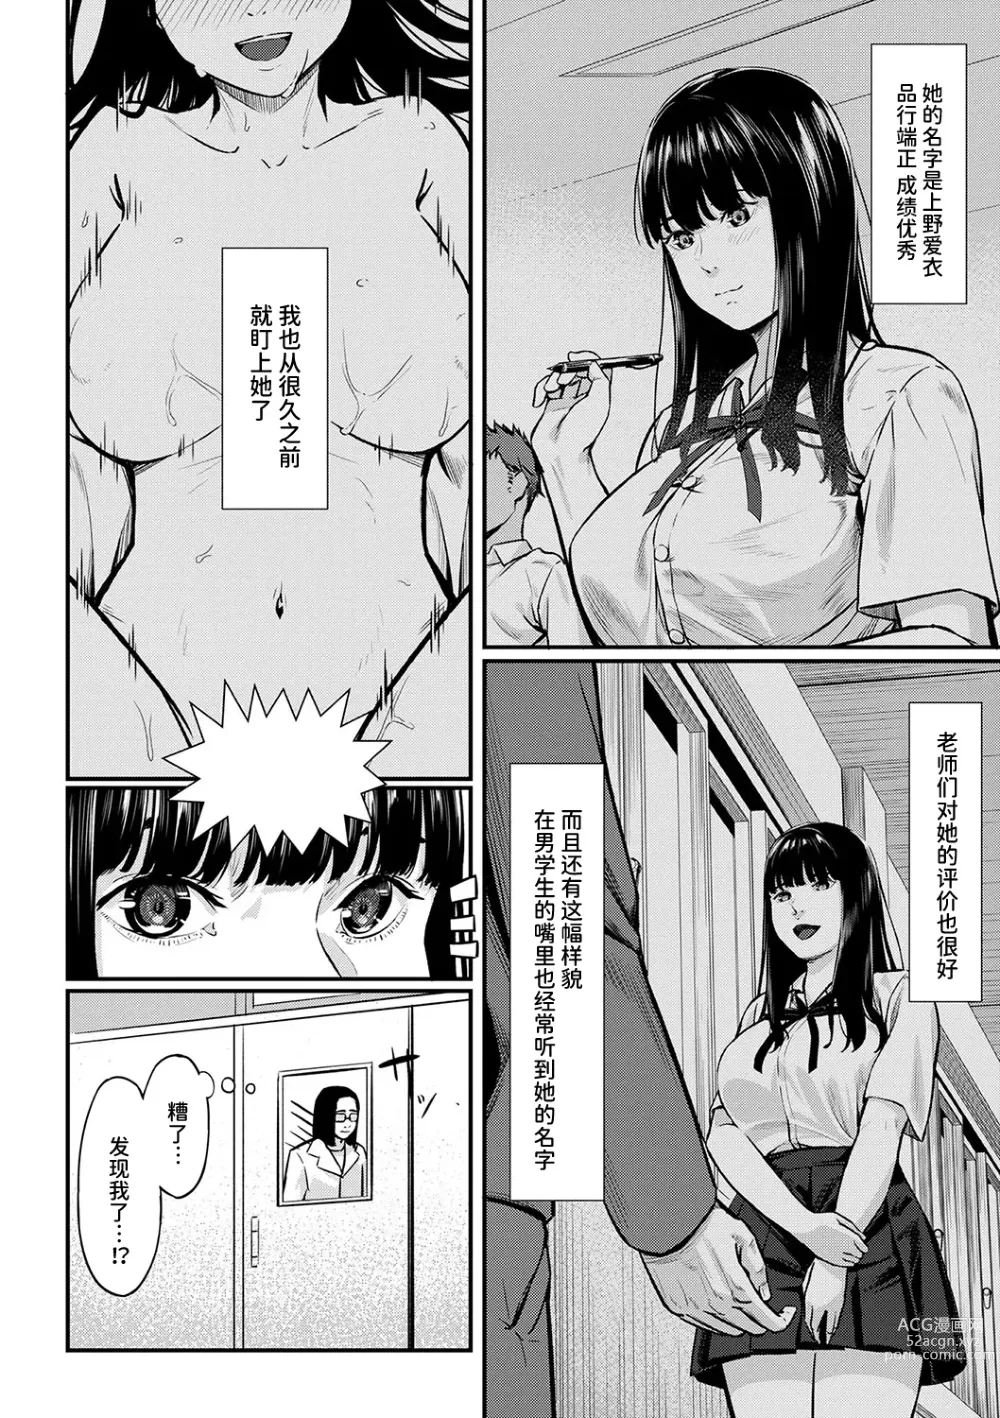 Page 8 of manga Obedience Girl Ch. 1